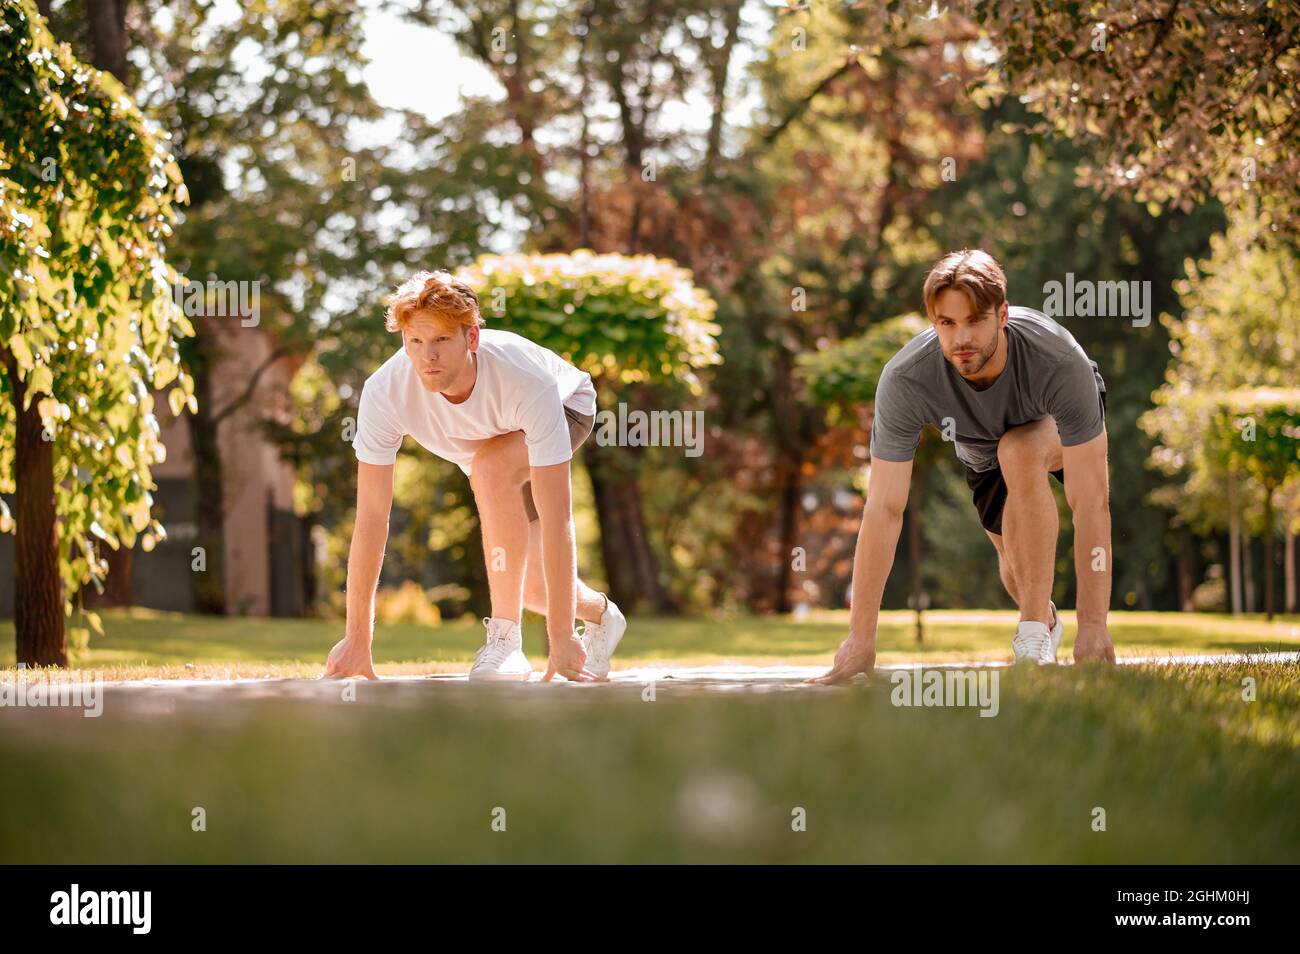 Guys getting ready for running competition. Stock Photo